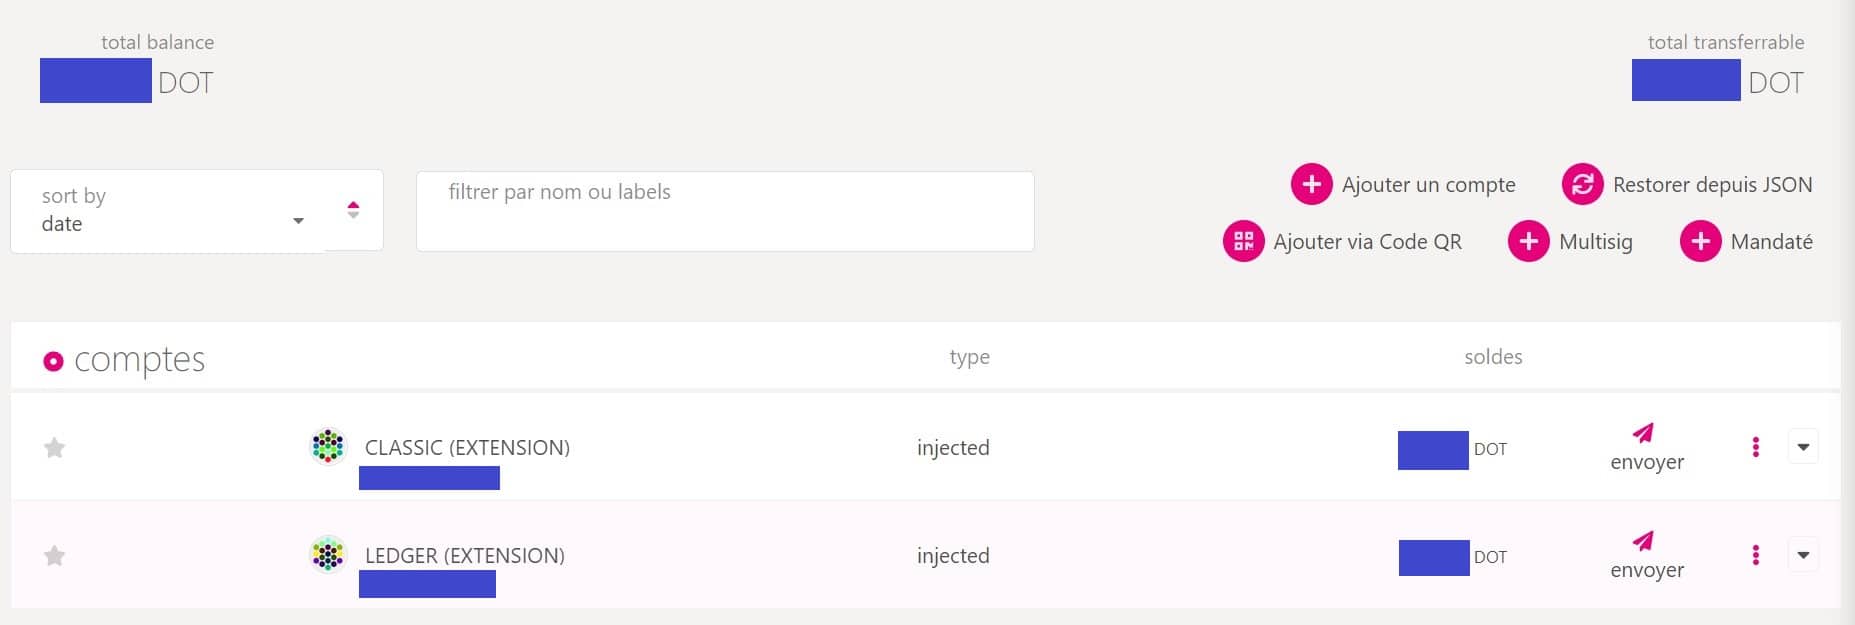 View of your different accounts on Polkadot blockchain